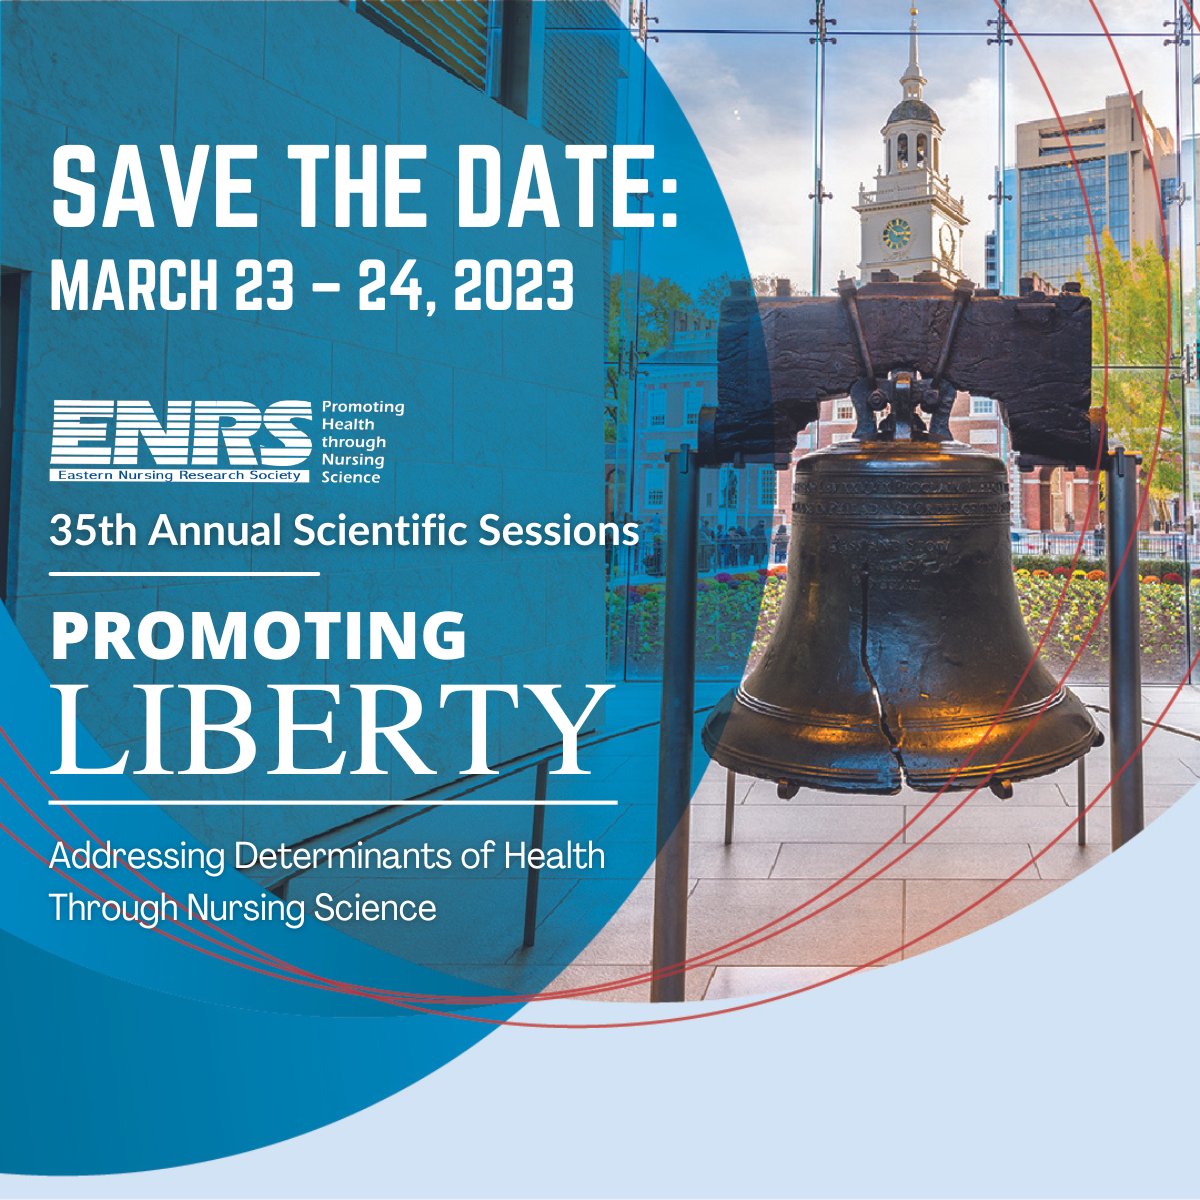 Save the Date for The 35th Annual Scientific Sessions: March 23 – 24, 2023 This year's theme will be Promoting Liberty: Addressing Determinants of Health Through Nursing Science Registration will open in mid-January. Learn more: enrs.memberclicks.net/2023-conference